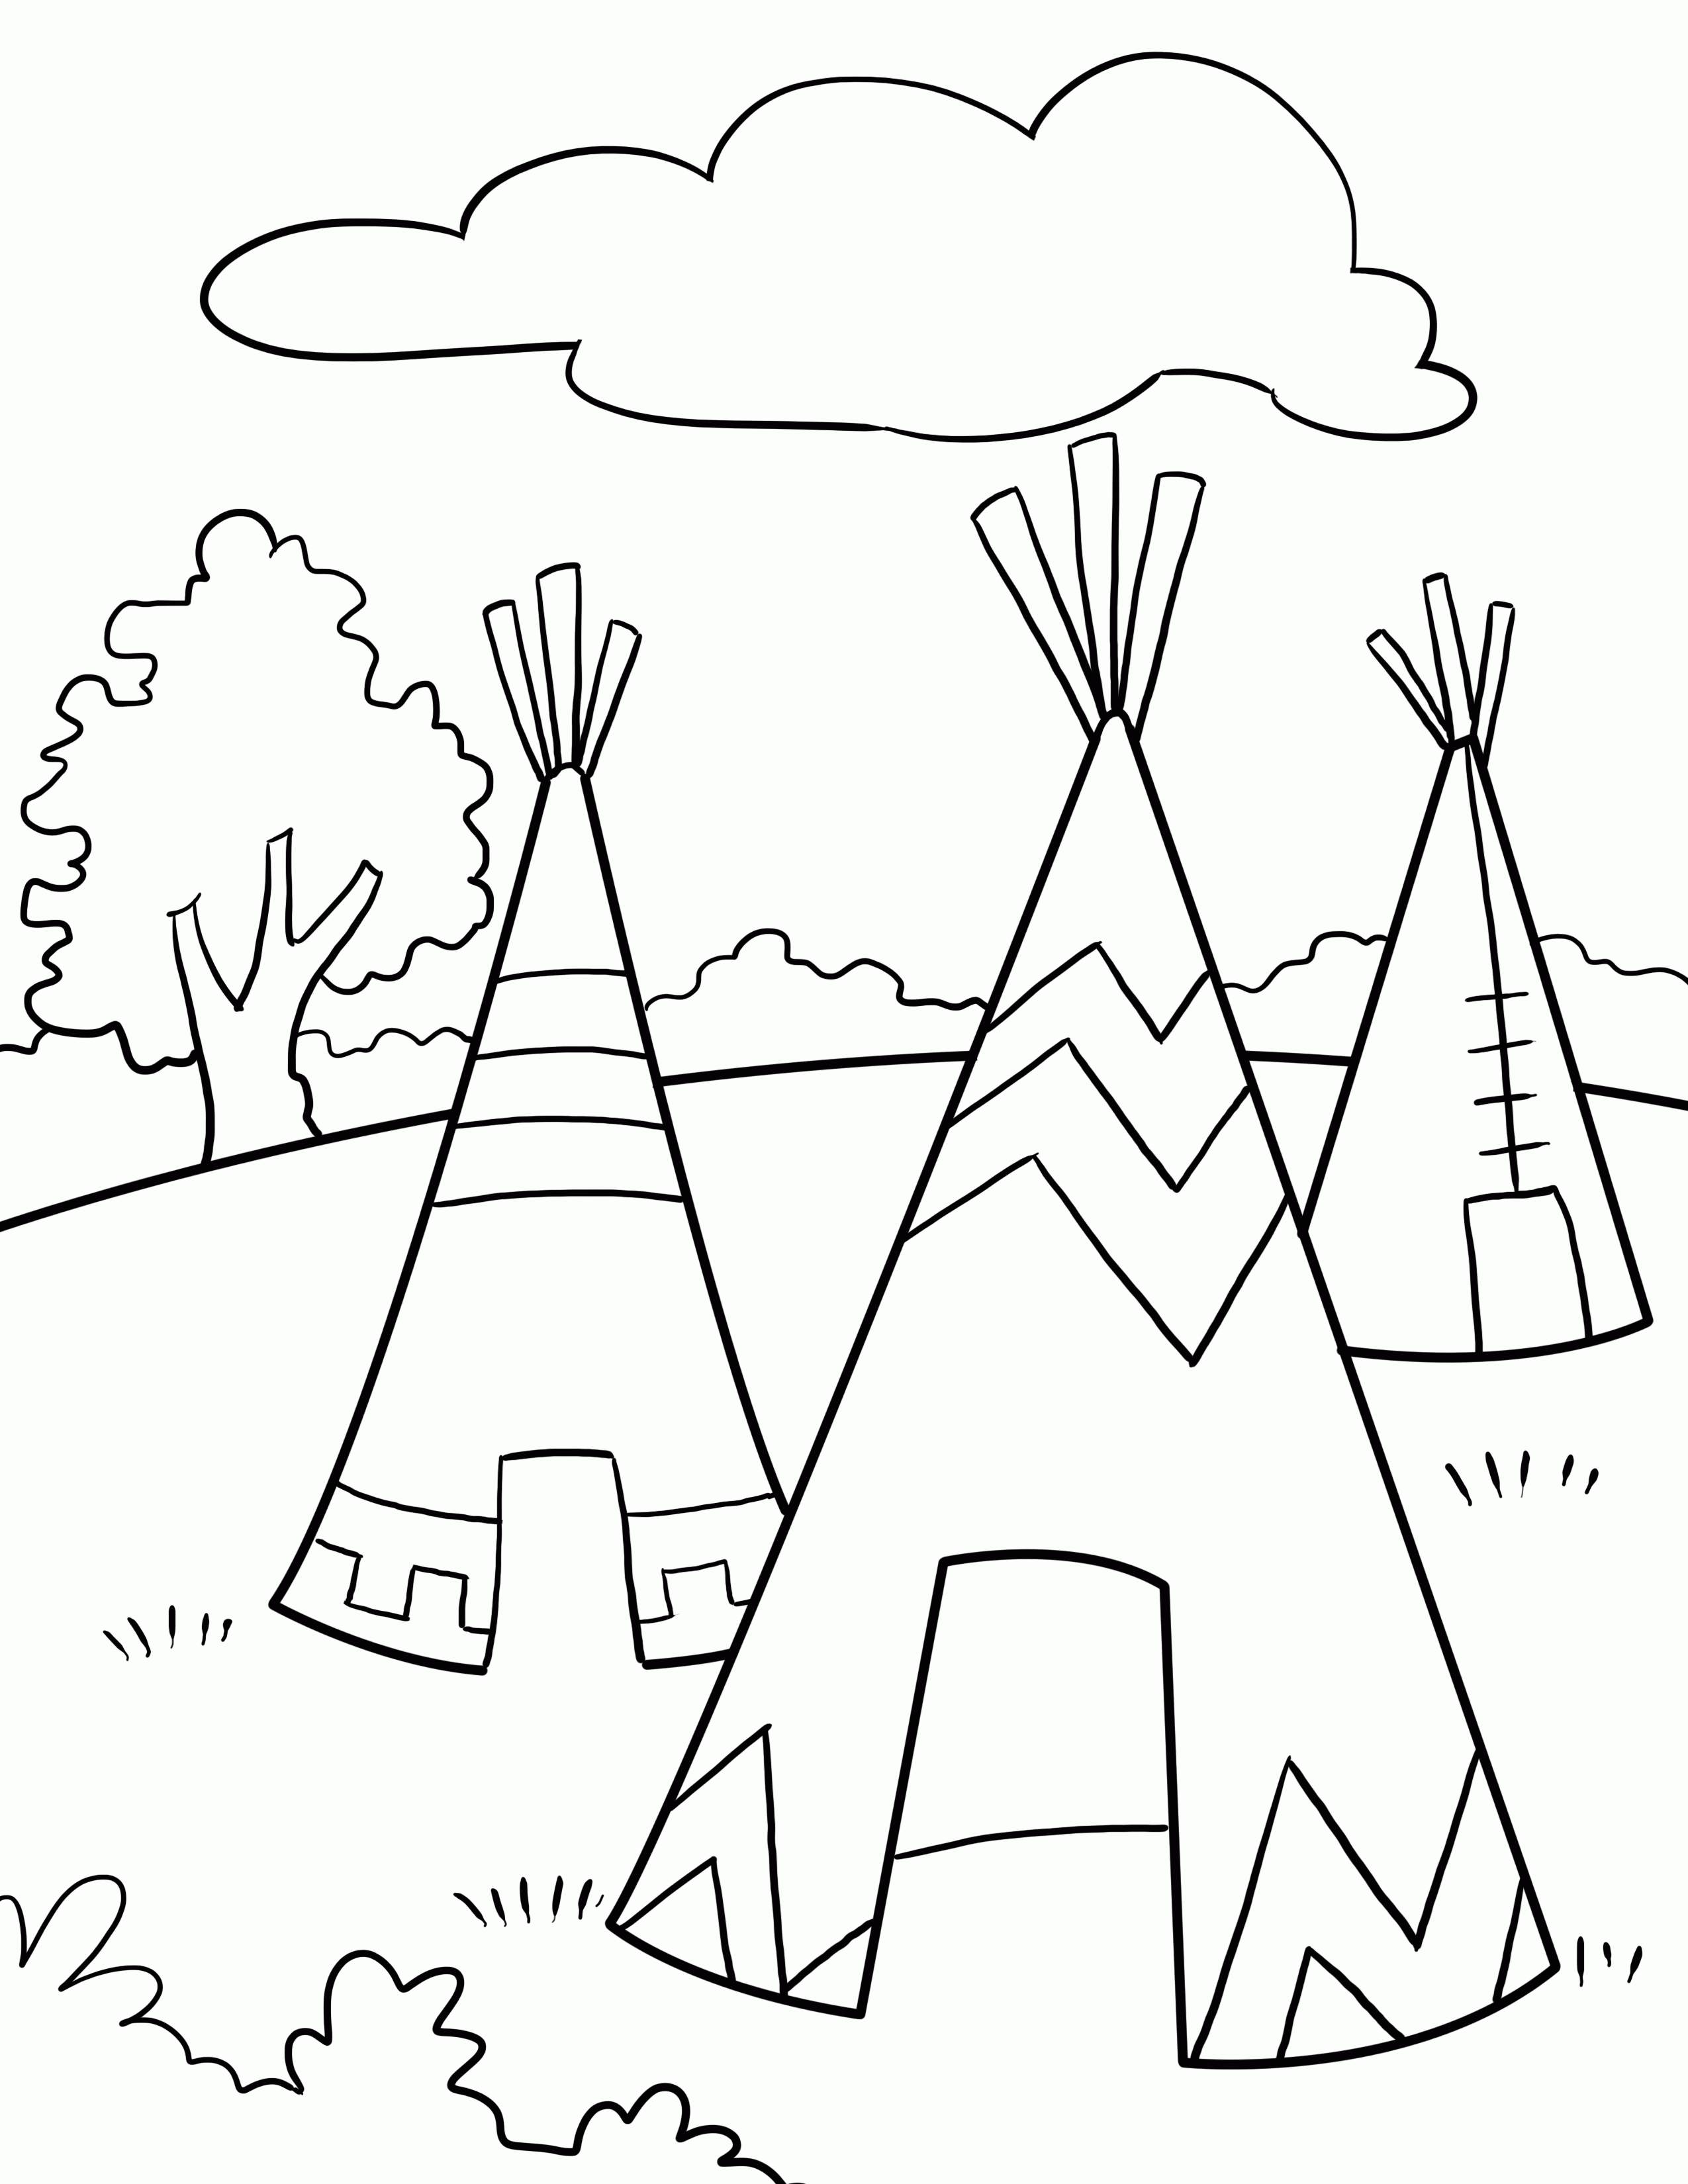 Thanksgiving Coloring Pages (2) - Coloring Kids